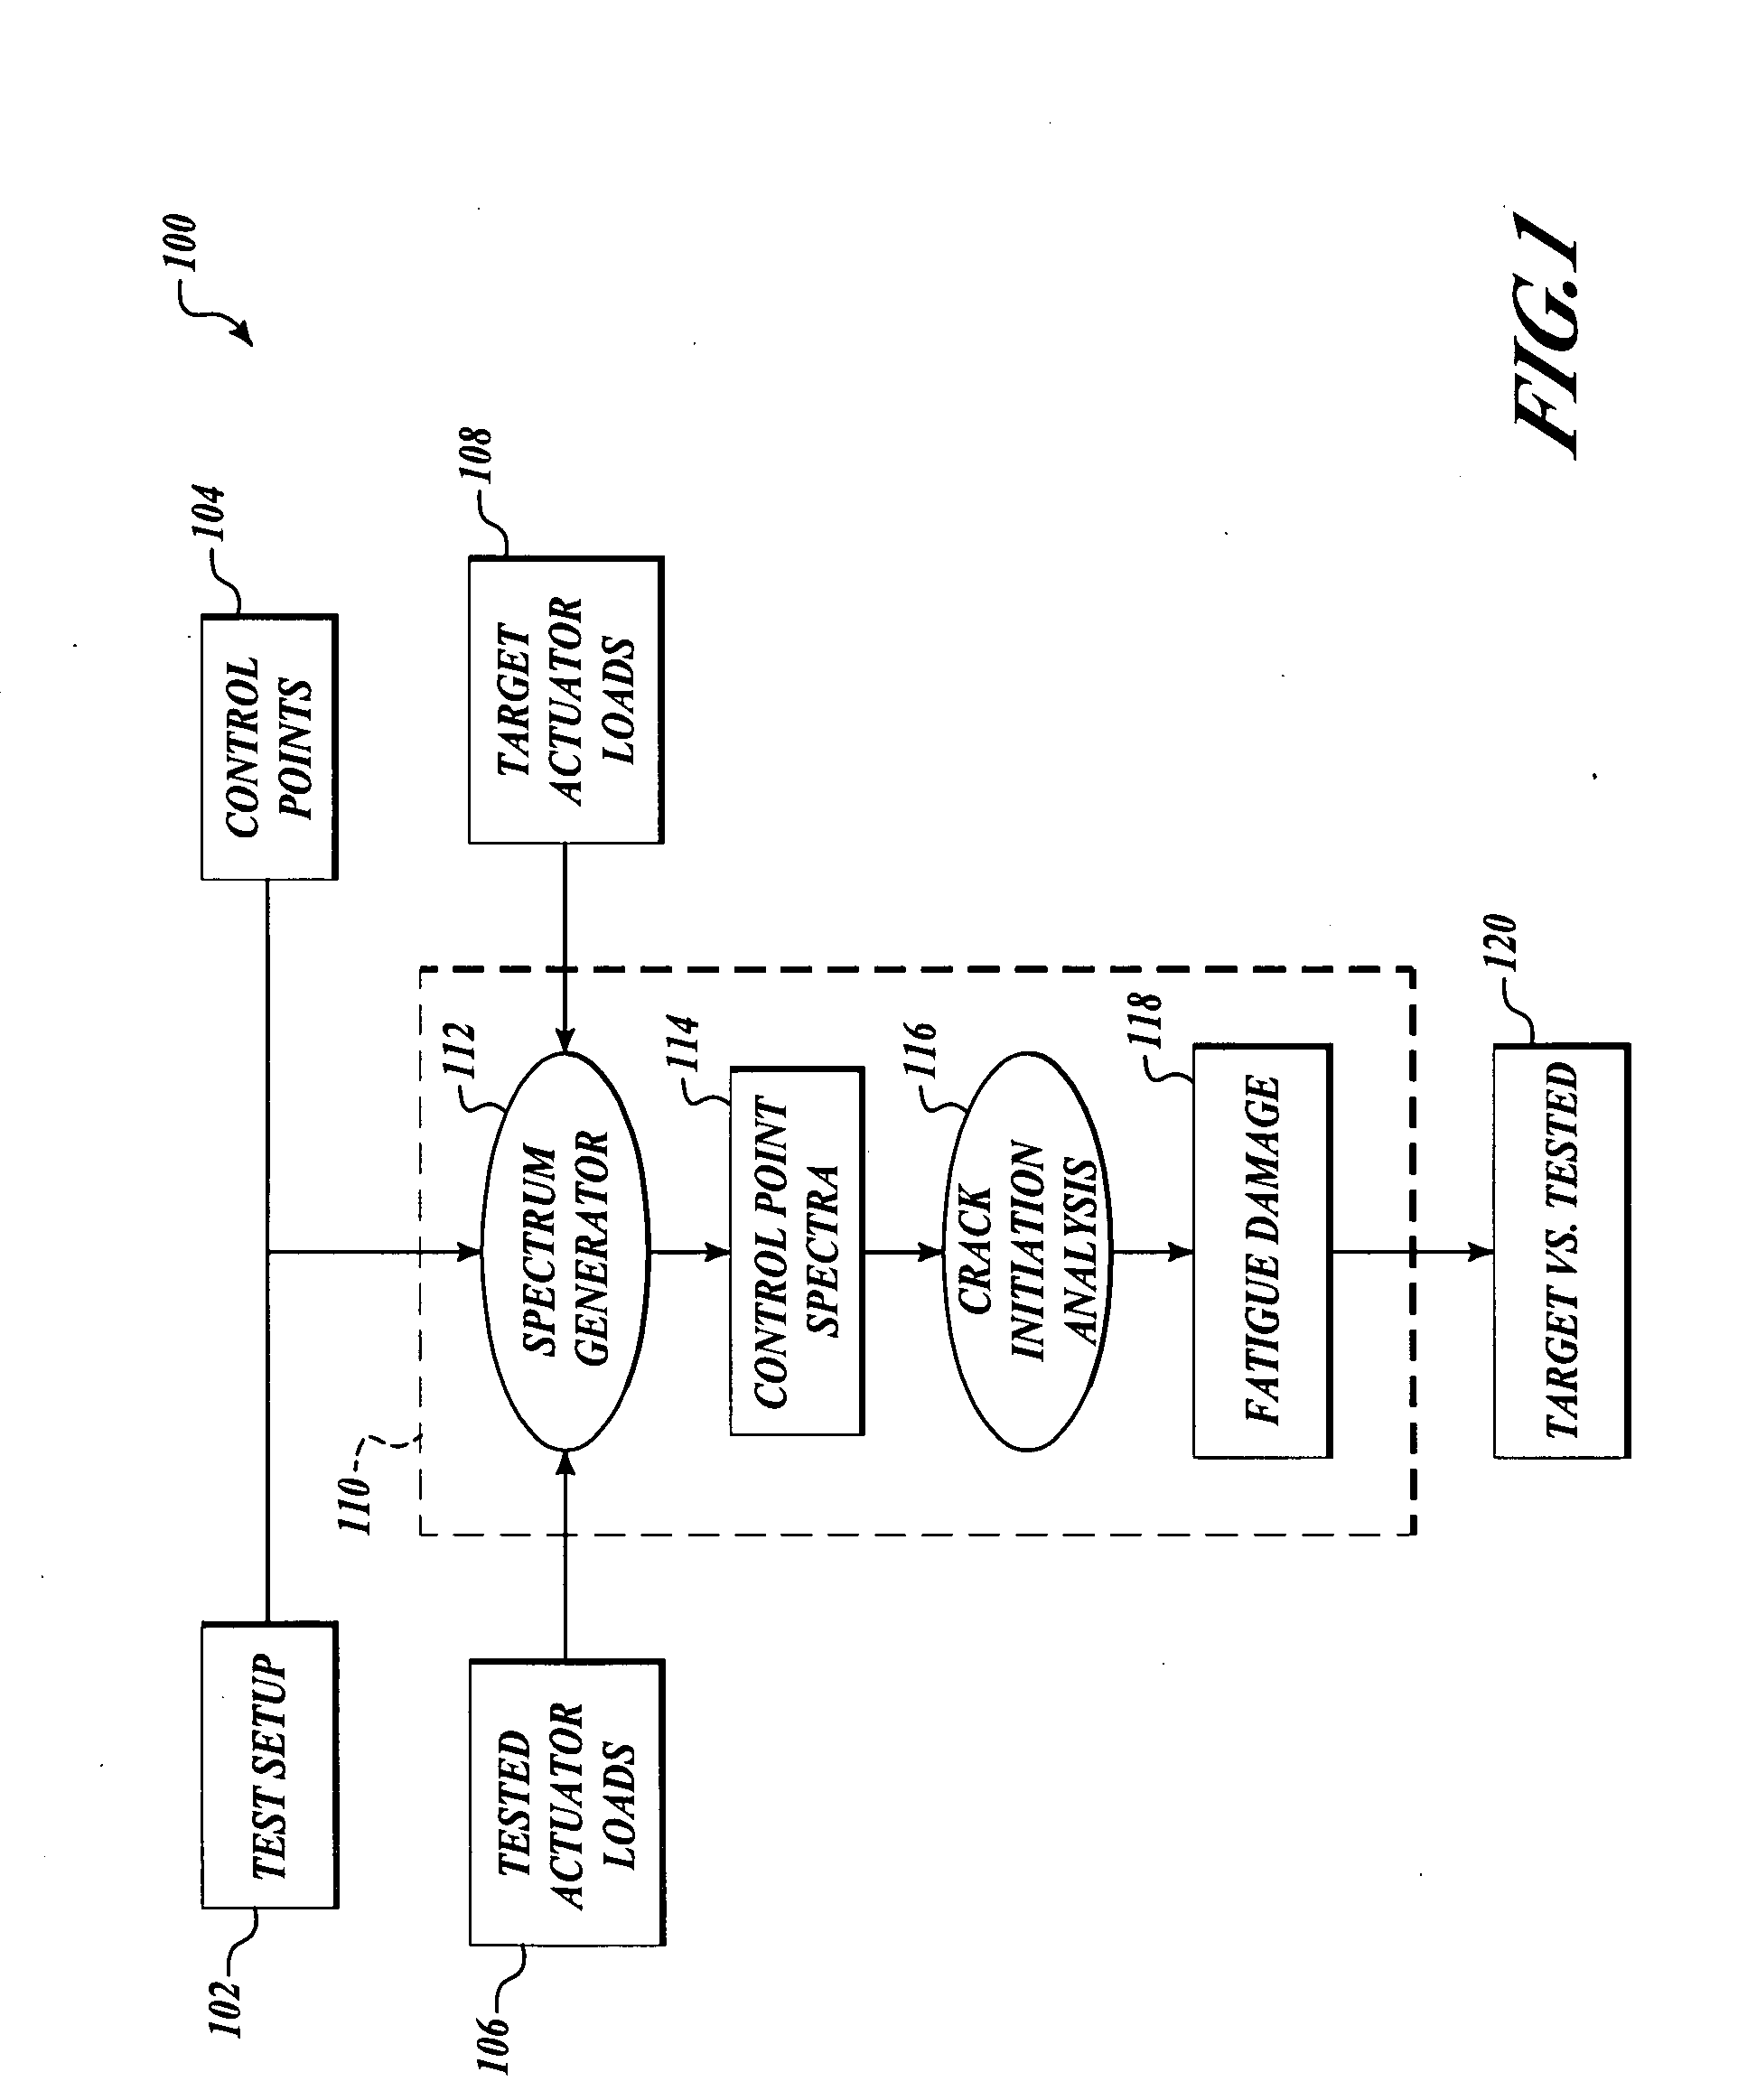 Methods and systems for analyzing structural test data